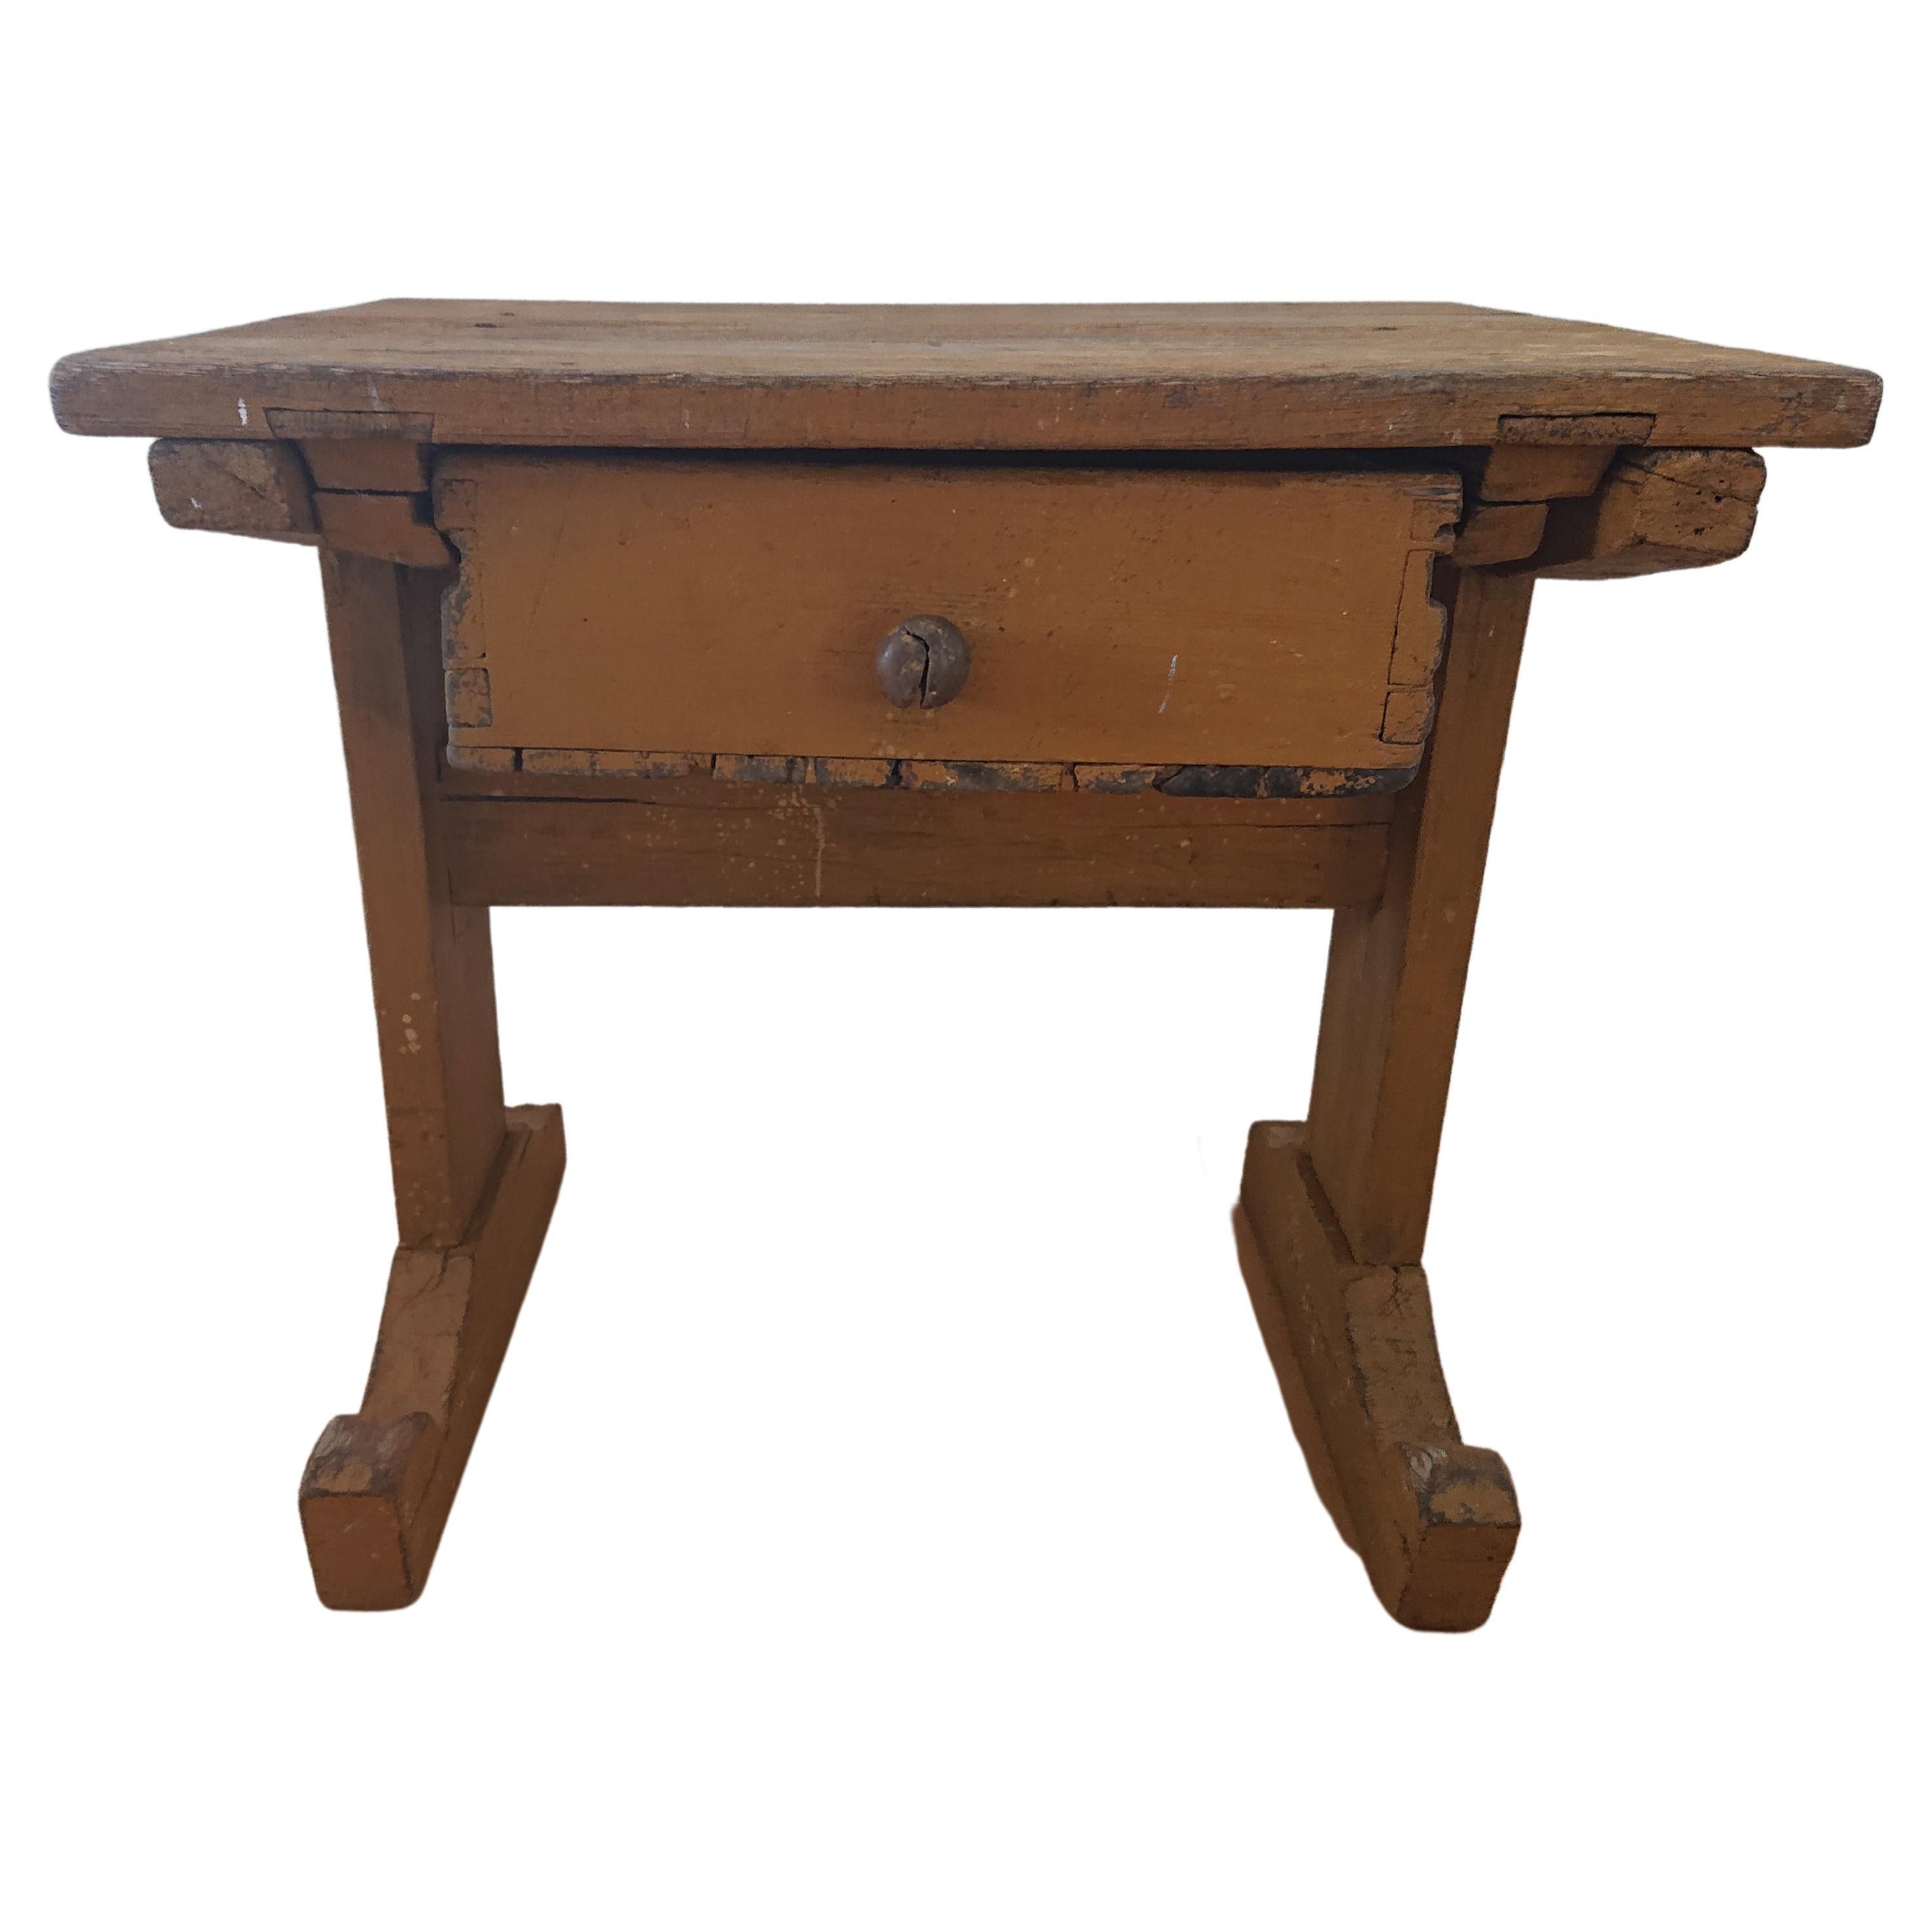 18th Century Swedish antique rustic Trestle Table Dated 1766 with Original Paint For Sale